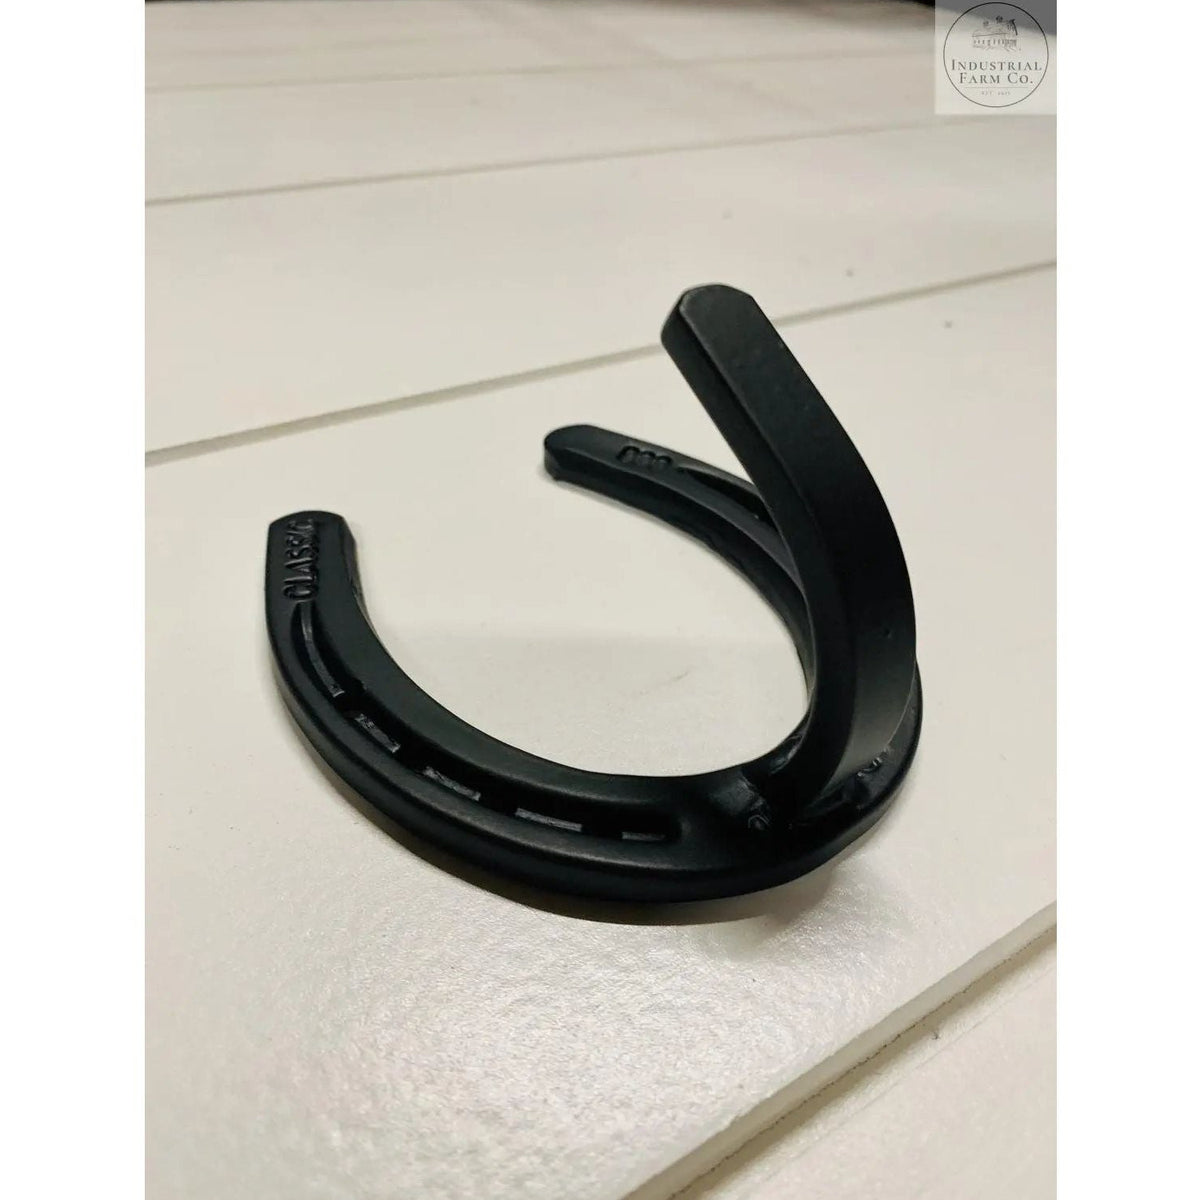 The Lucky Marion Horseshoe Hook Hook .5&quot; Wide Hook Finish Clear Coat | Industrial Farm Co